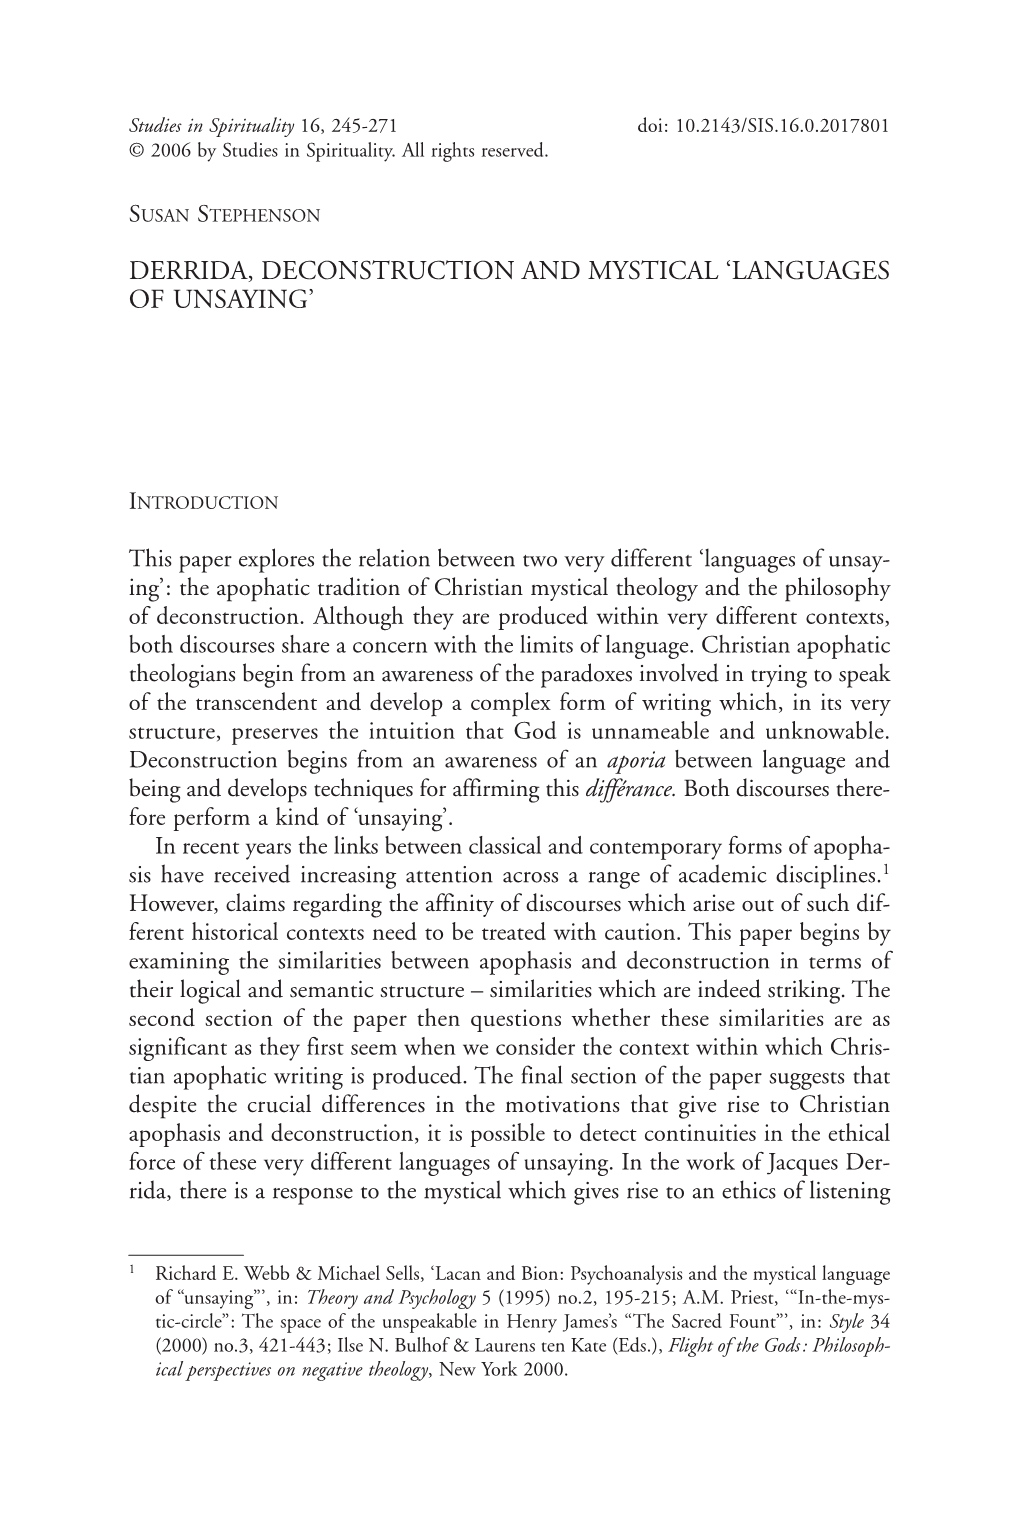 Derrida, Deconstruction and Mystical 'Languages of Unsaying'